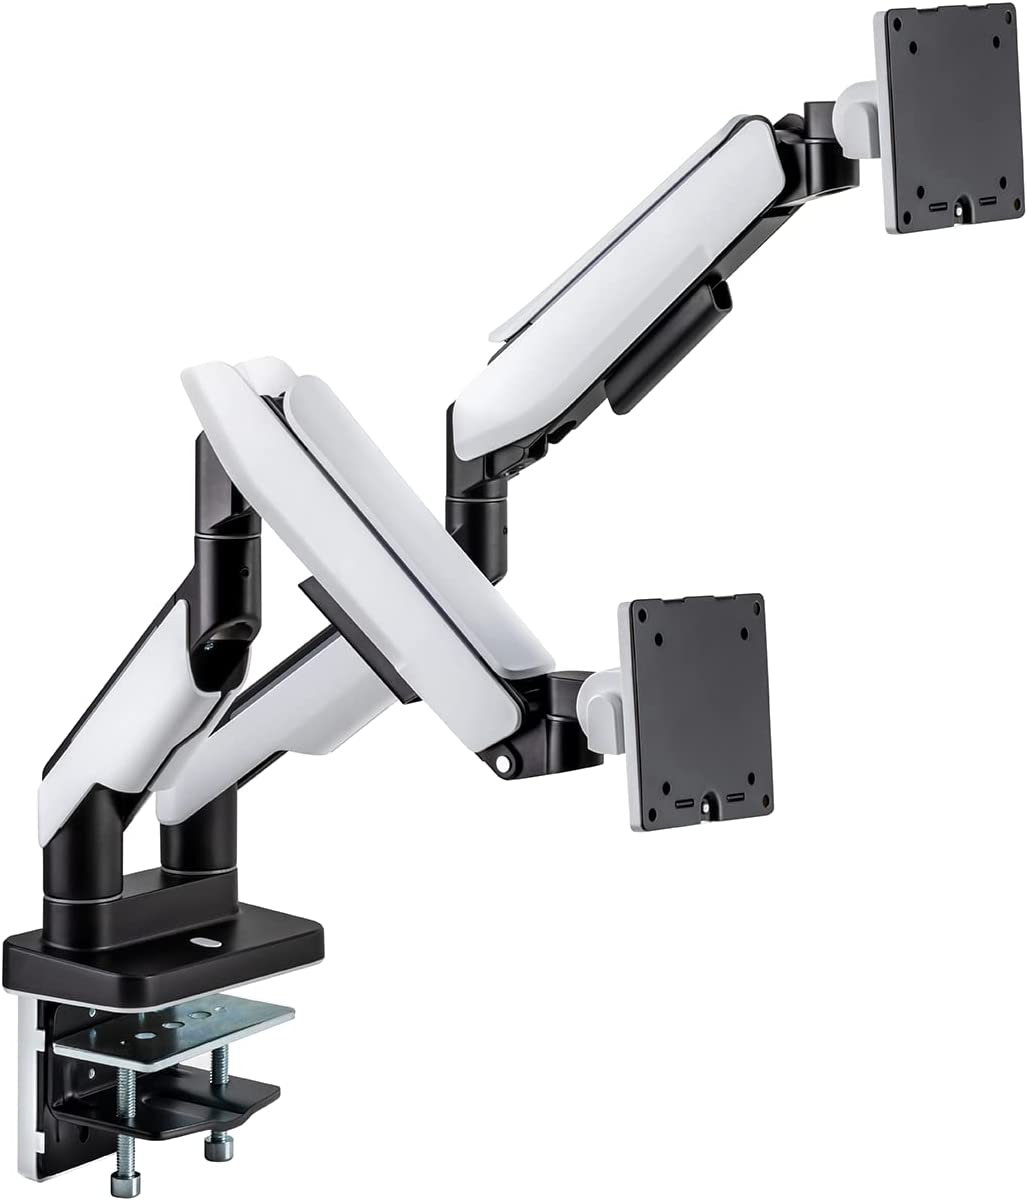 POUT - Eyes 19 Dual Heavy-Duty RGB Gaming Monitor Arm - Fully Adjustable Full Motion Tilt Swivel Rotate Desk Mount Stand